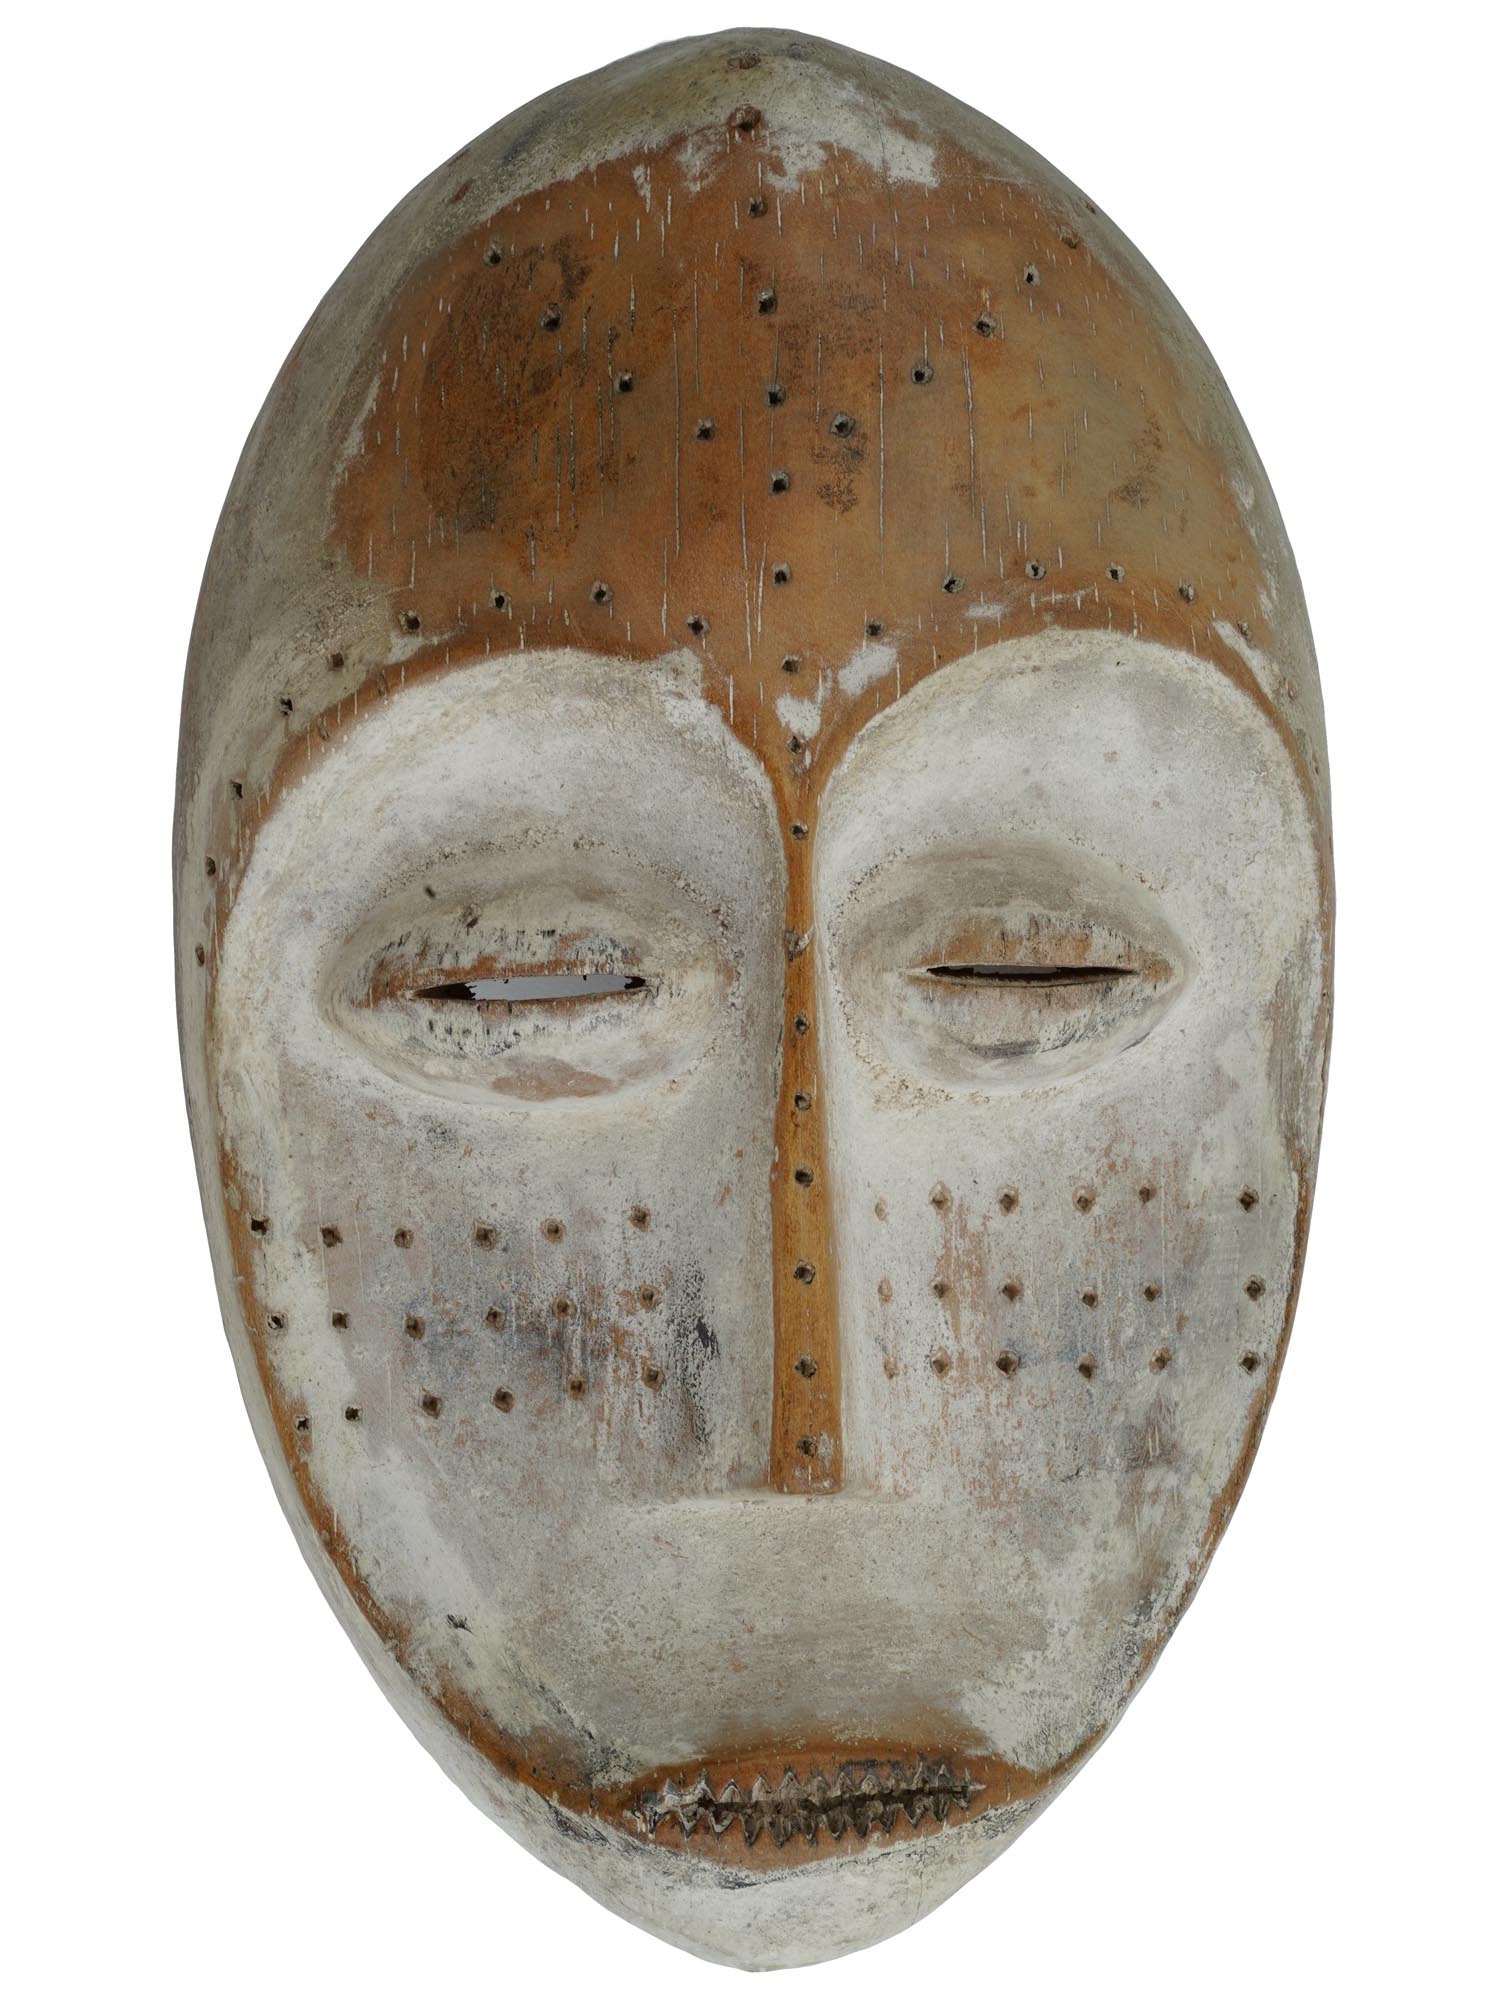 CENTRAL AFRICAN CONGO LEGA BWAMI WOODEN MASK PIC-0